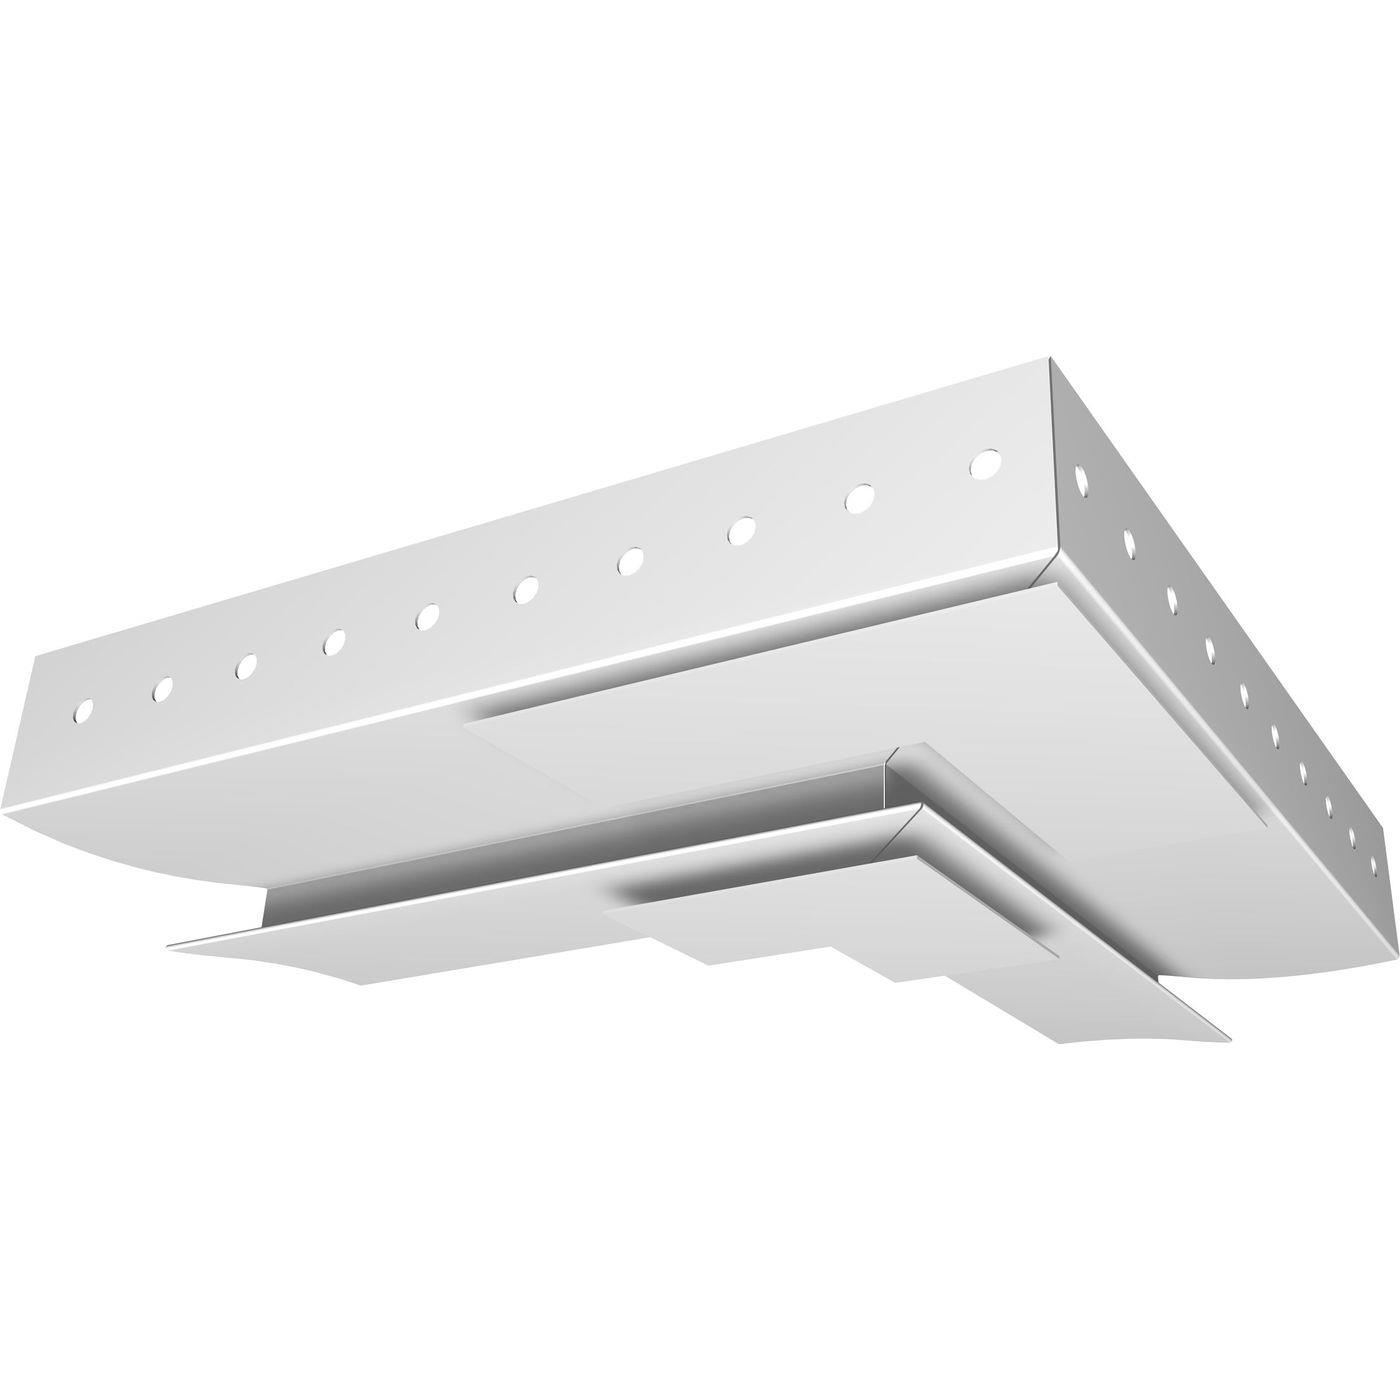 90° Mitre cover for WRD-40 LED drywall profiles White